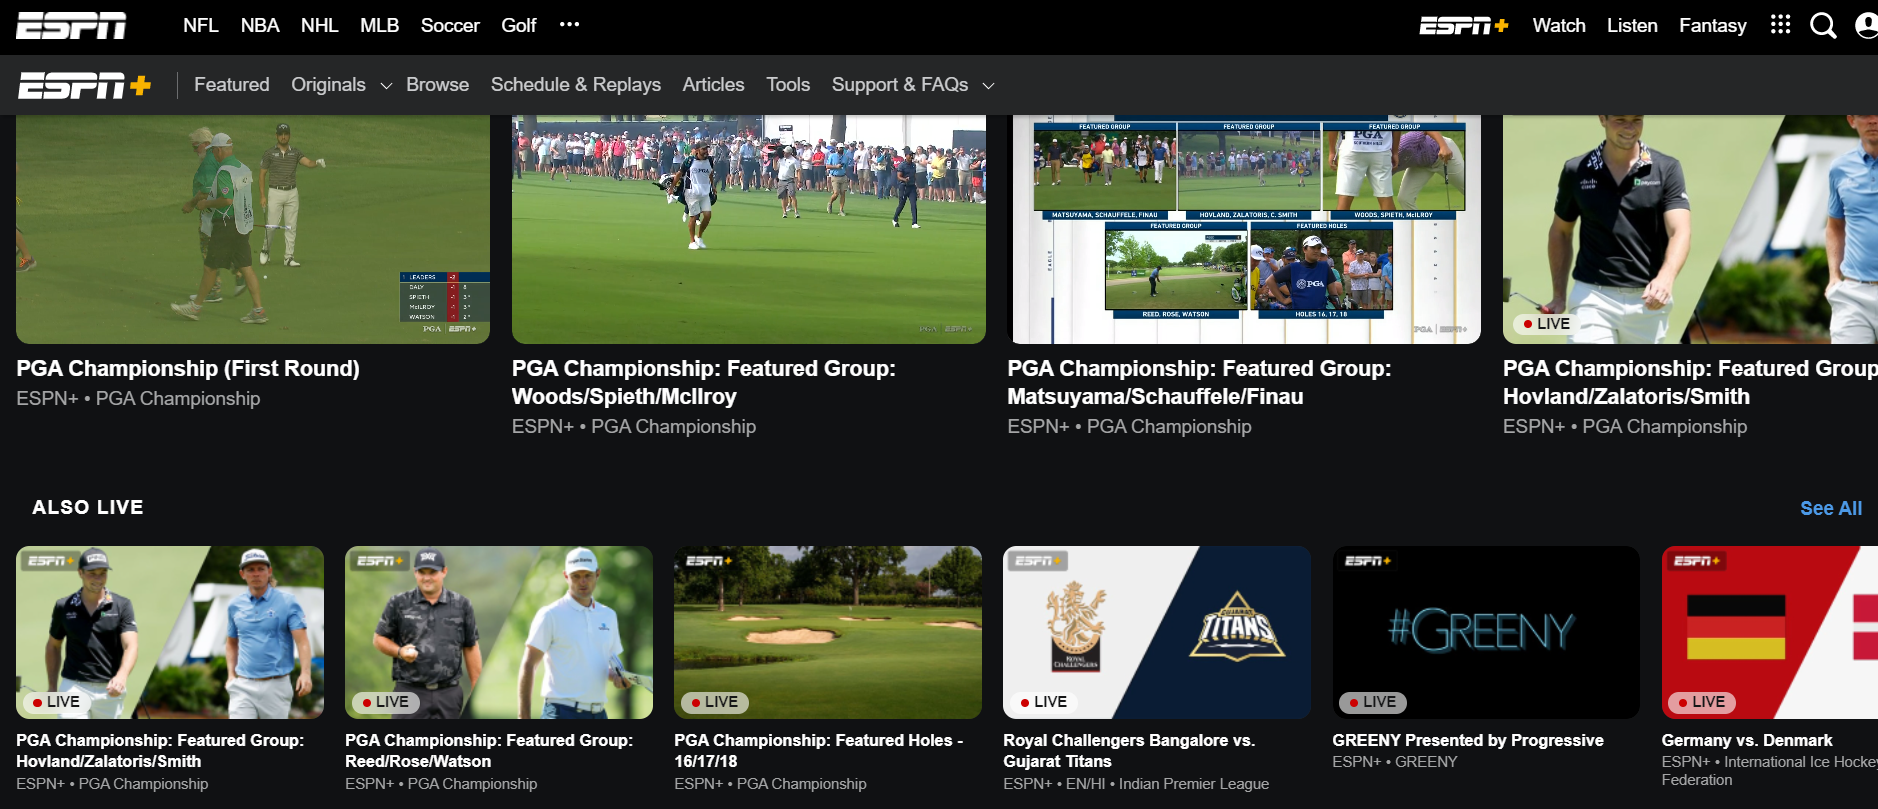 ESPN+ Featured Group, Featured Holes Producer at PGA Championship Pulls Together Resources to Serve Golf Fans